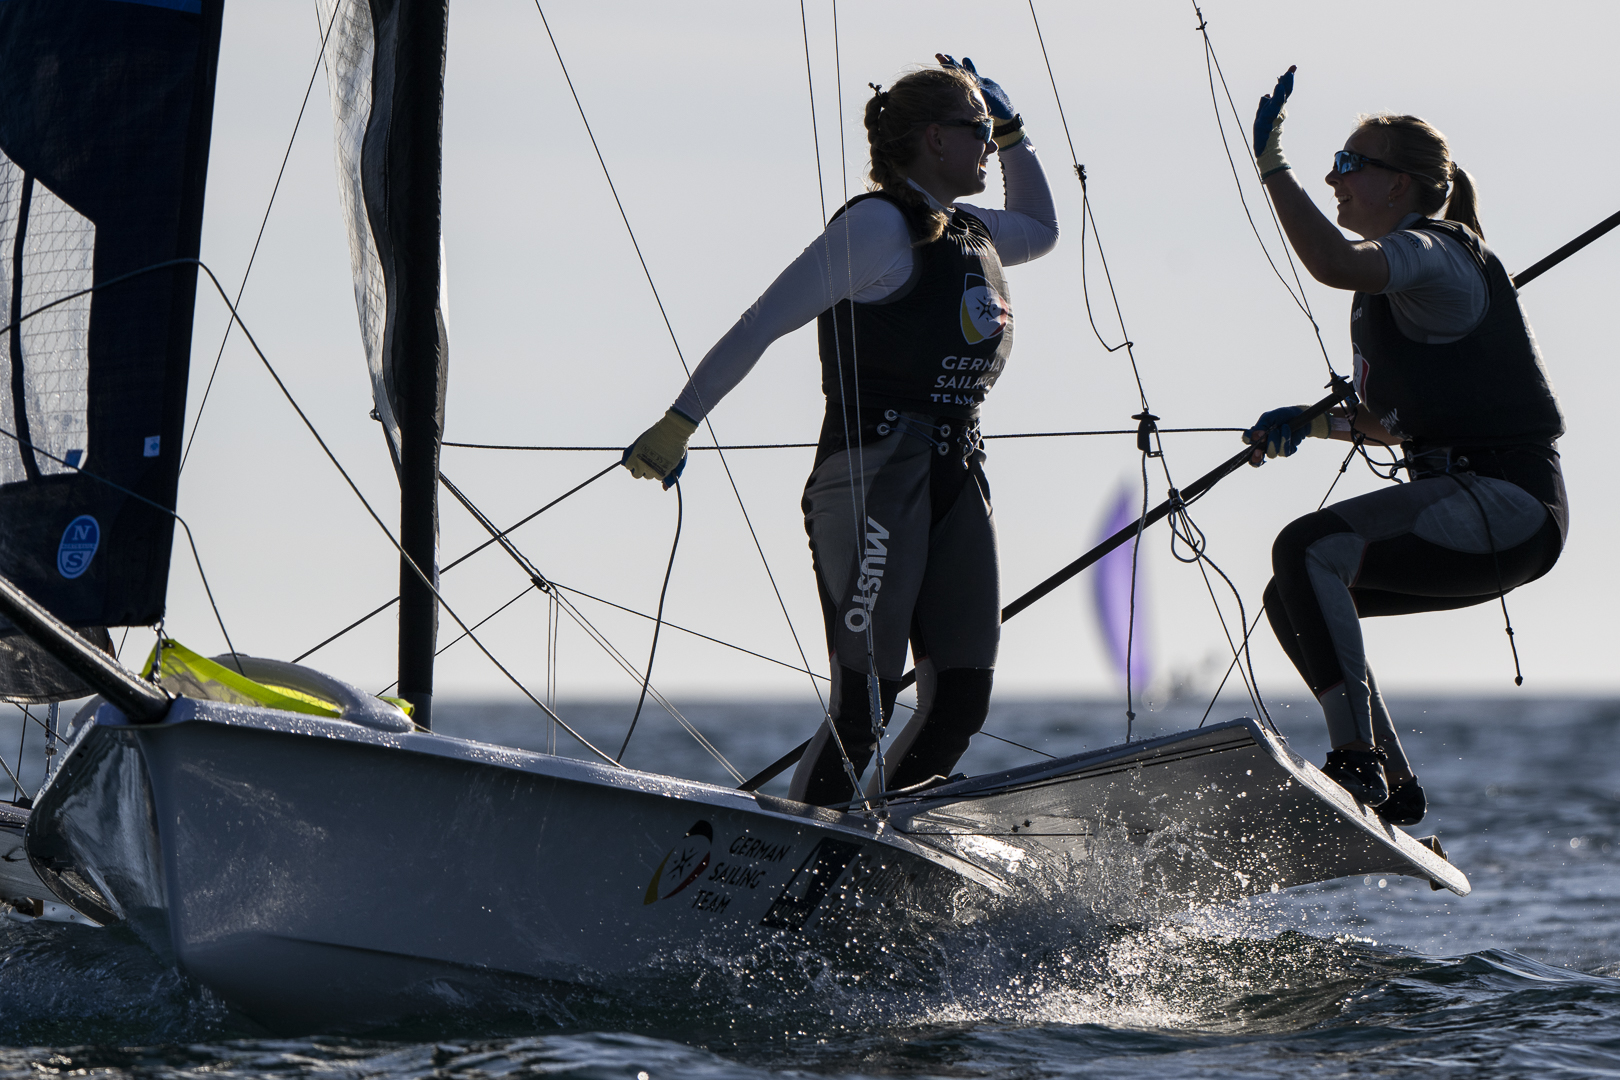 Bergmann and Wille win three gold fleet races - in contention for Olympic berth